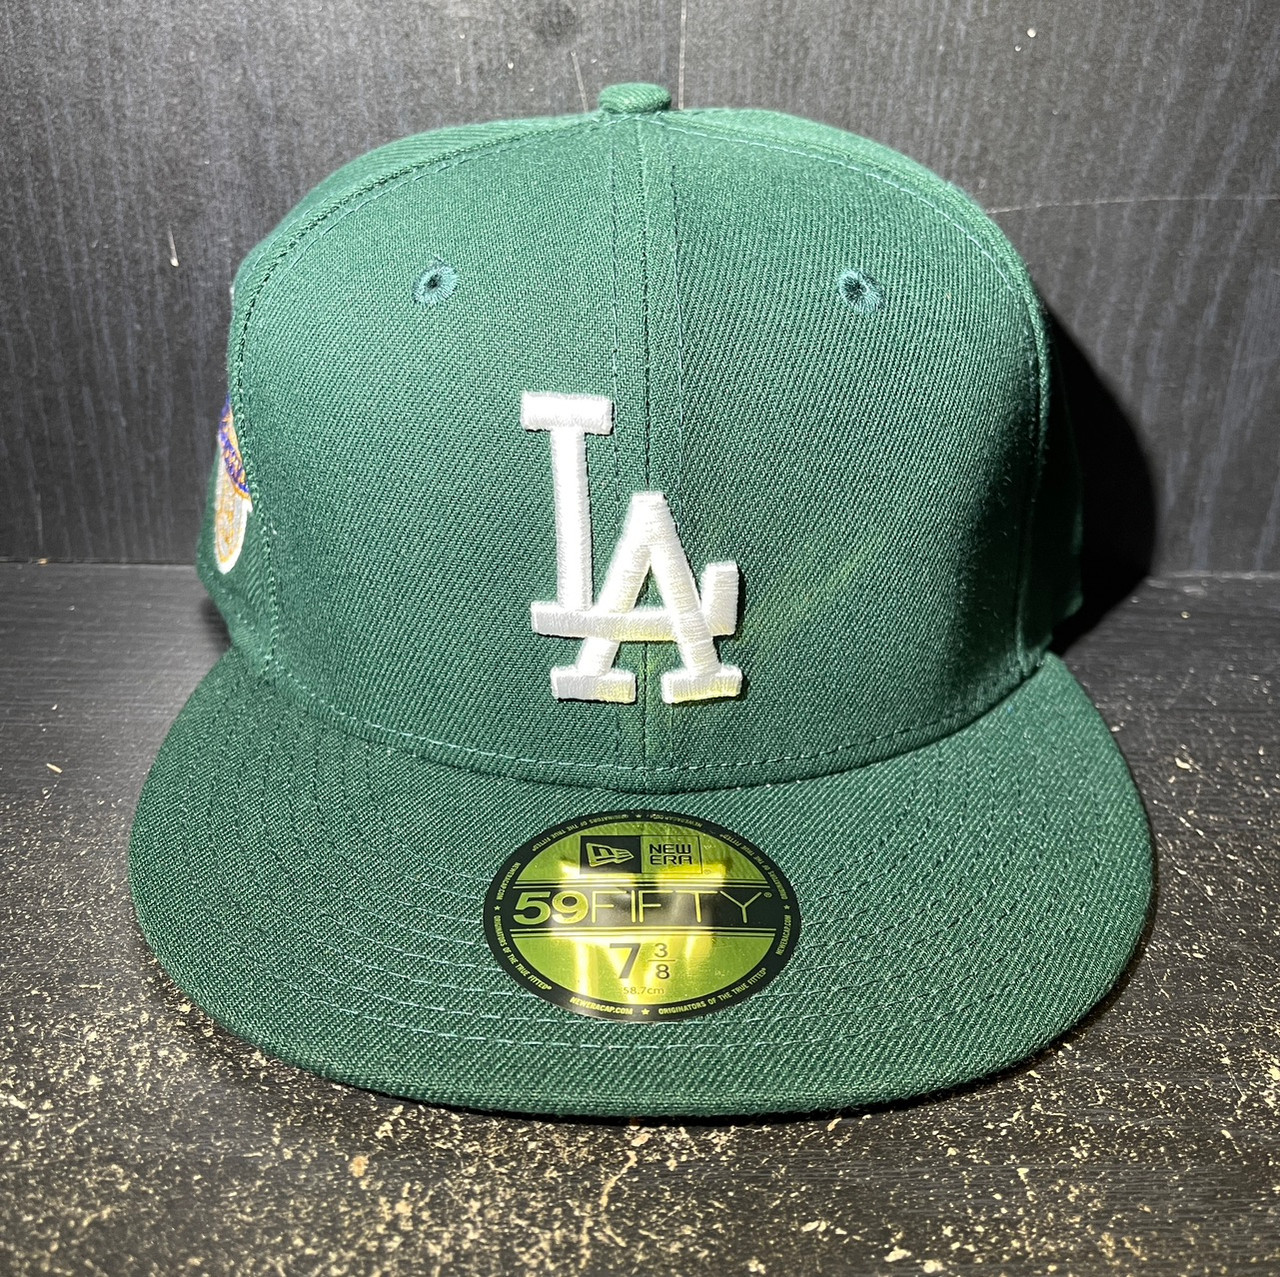 green fitted hat